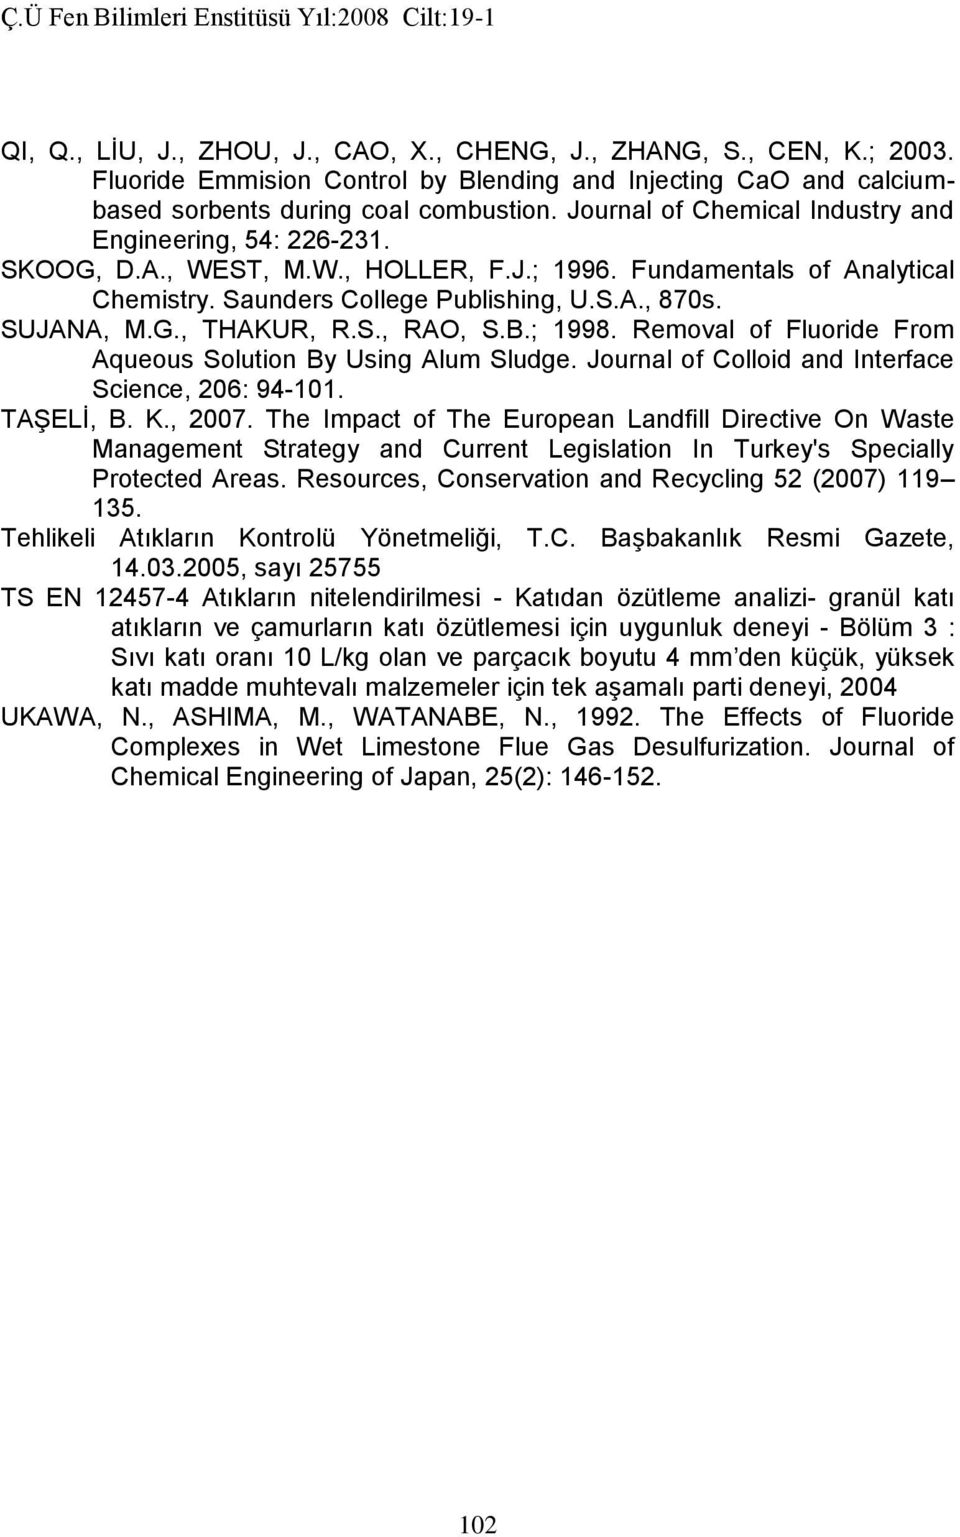 S., RAO, S.B.; 1998. Removal of Fluoride From Aqueous Solution By Using Alum Sludge. Journal of Colloid and Interface Science, 206: 94-101. TAŞELİ, B. K., 2007.